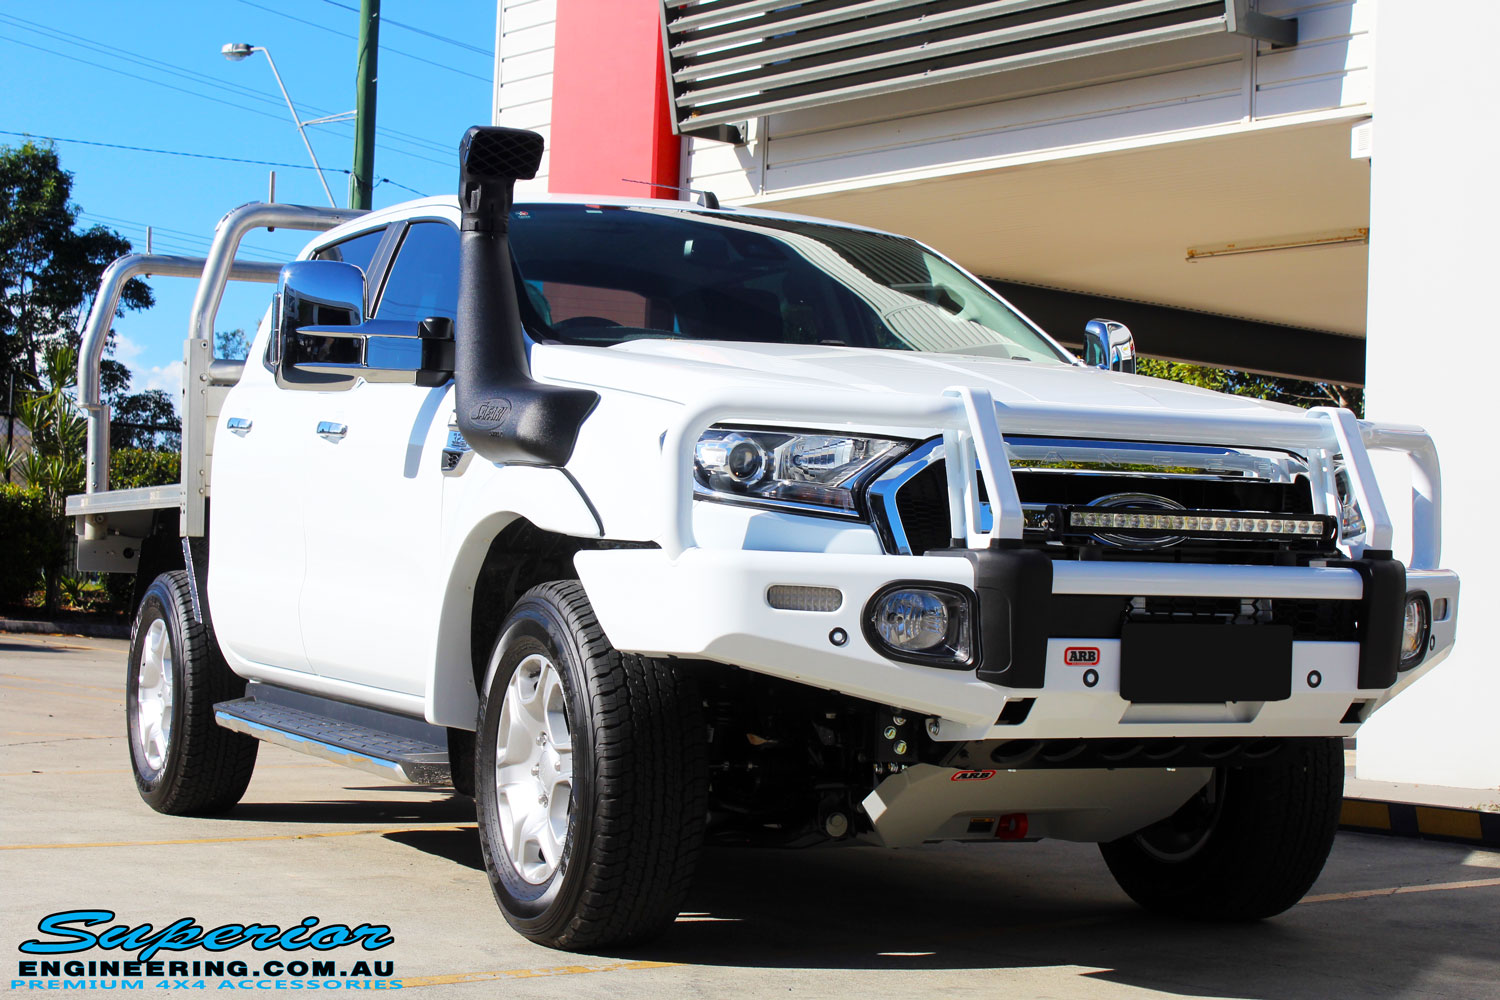 Right front side view of a Ford PXII Ranger in White On The Hoist @ Superior Engineering Deception Bay Showroom